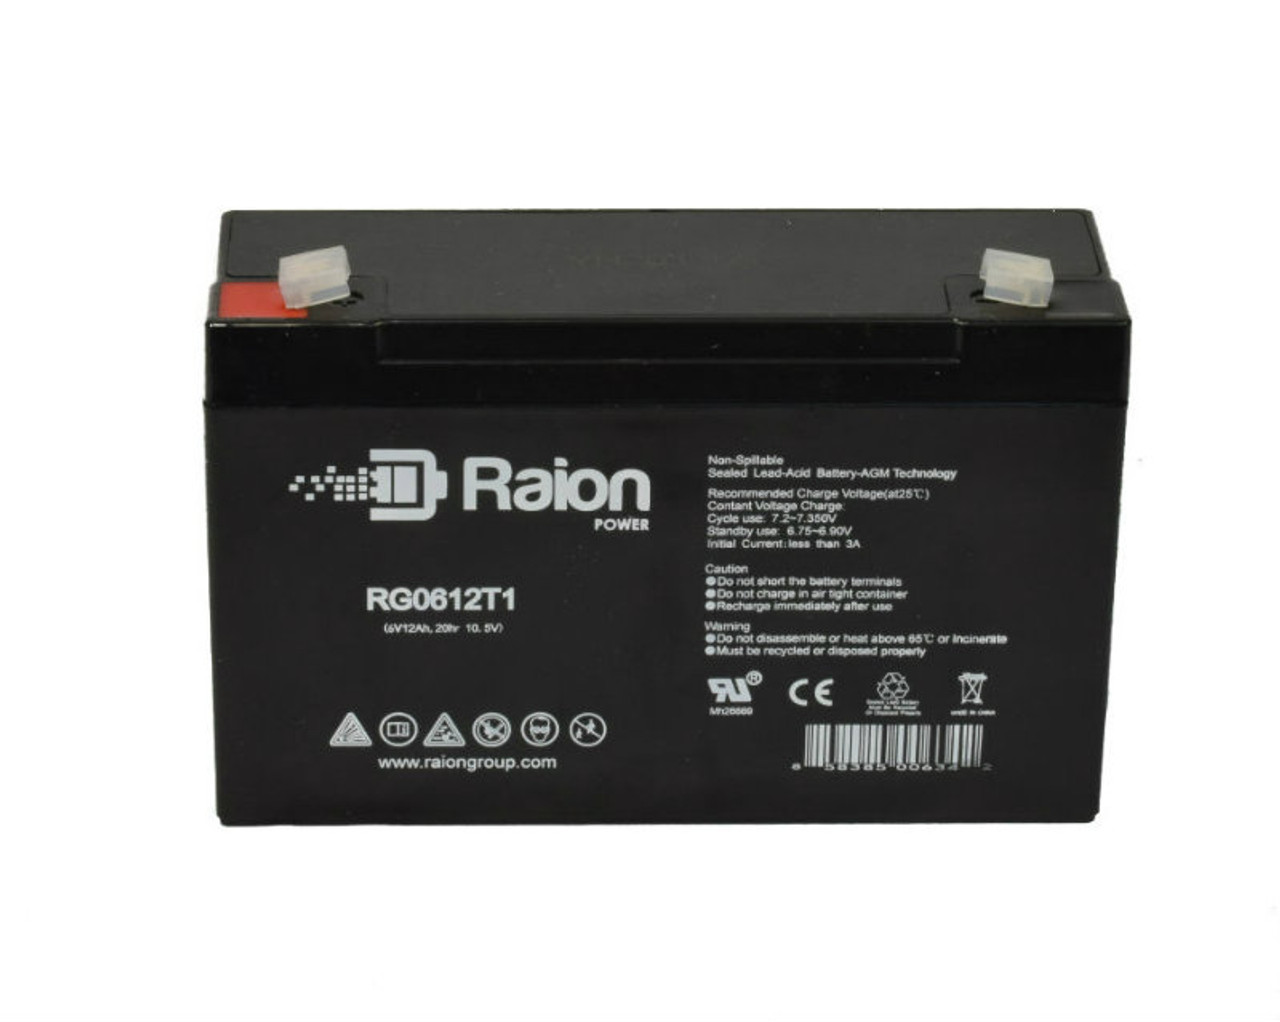 Raion Power RG06120T1 Replacement Battery Cartridge for Minuteman A 500/2